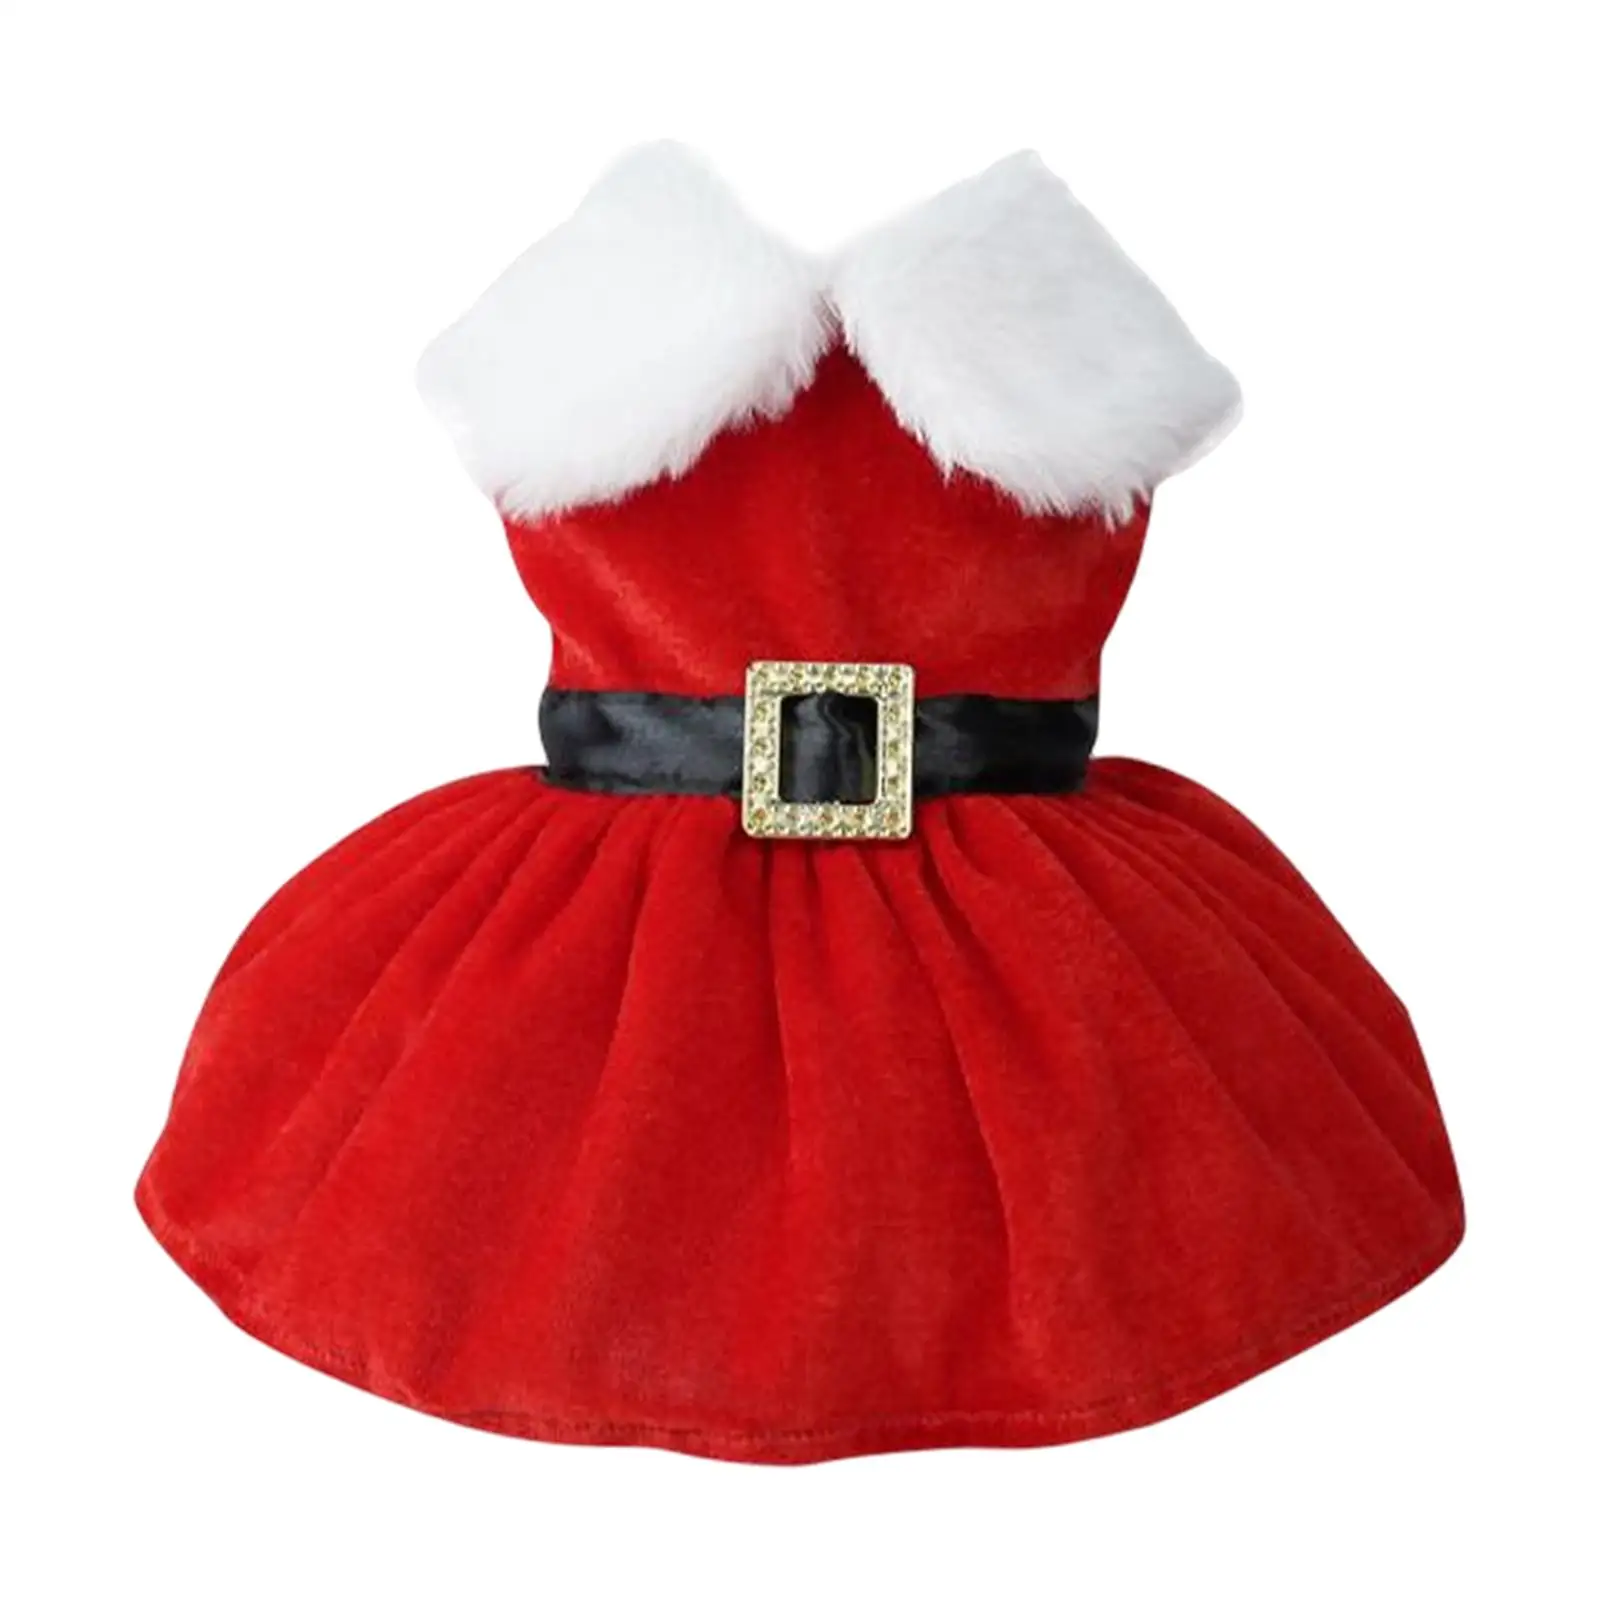 Pet Christmas Costume Clothes Dress up Soft Clothing dog Cosplay Holiday Accessories Warm Winter festival Outfit